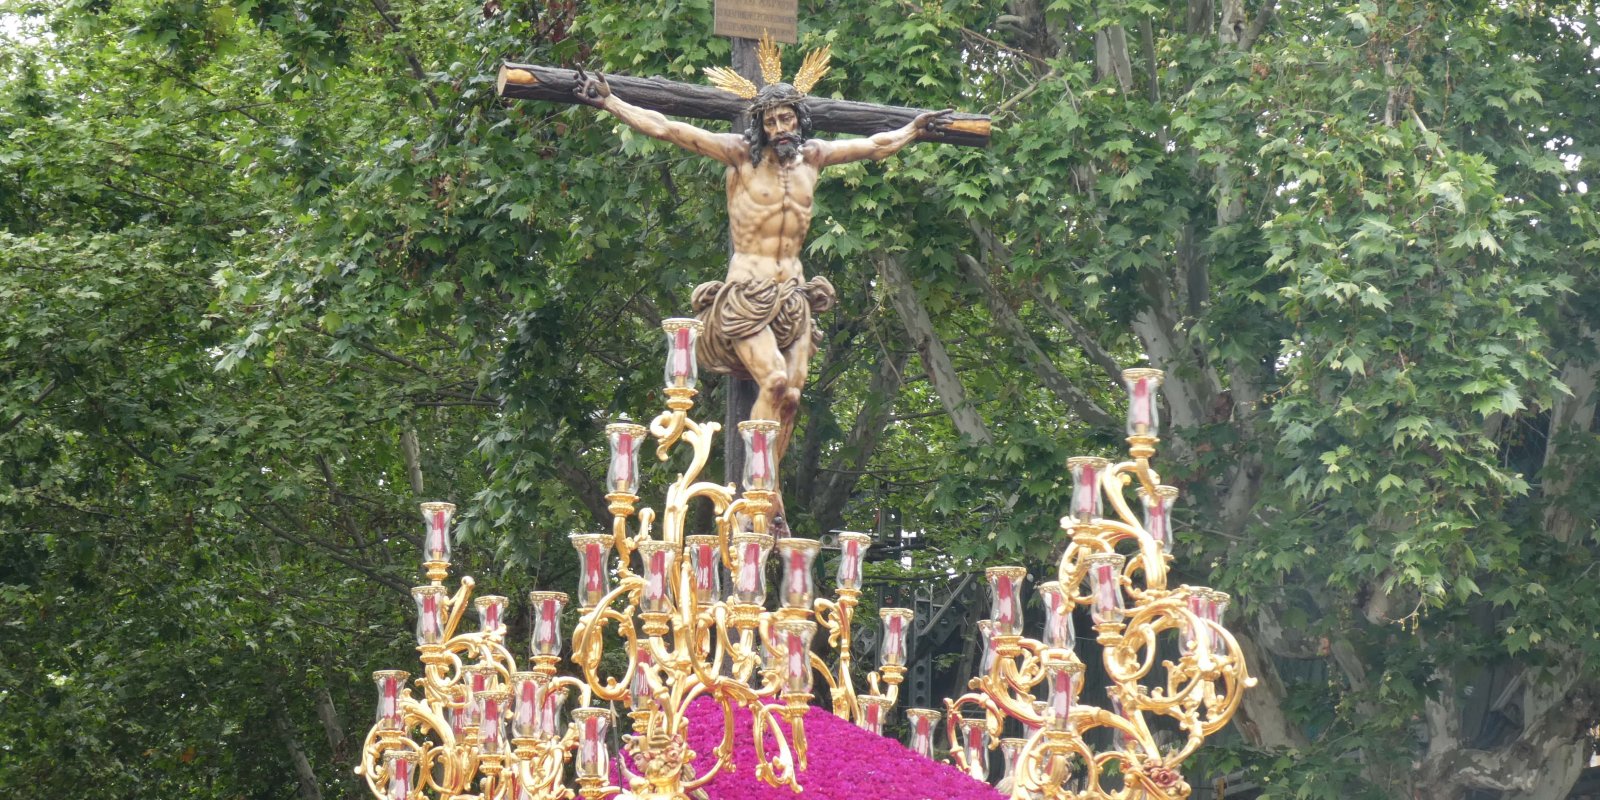 What you should know about Semana Santa in Seville